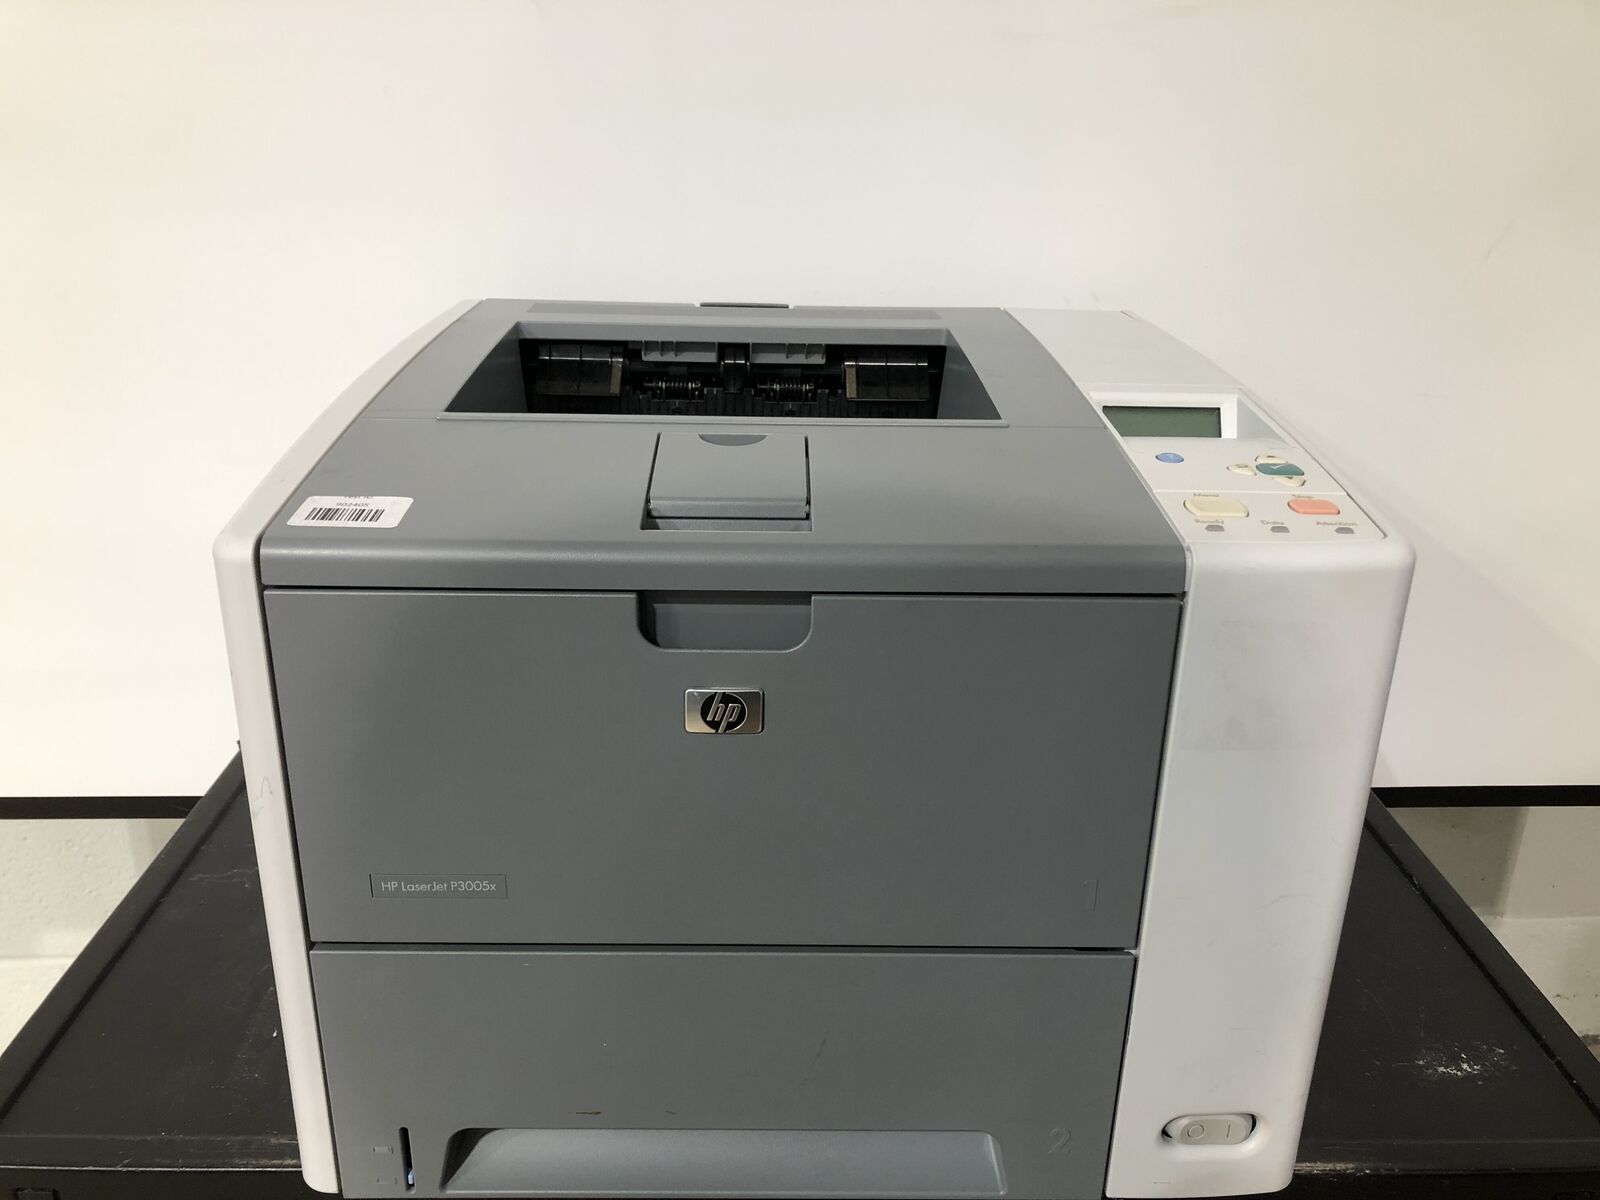 HP LaserJet P3005X Workgroup Laser Printer with TONER and 22K Pgs TESTED & RESET